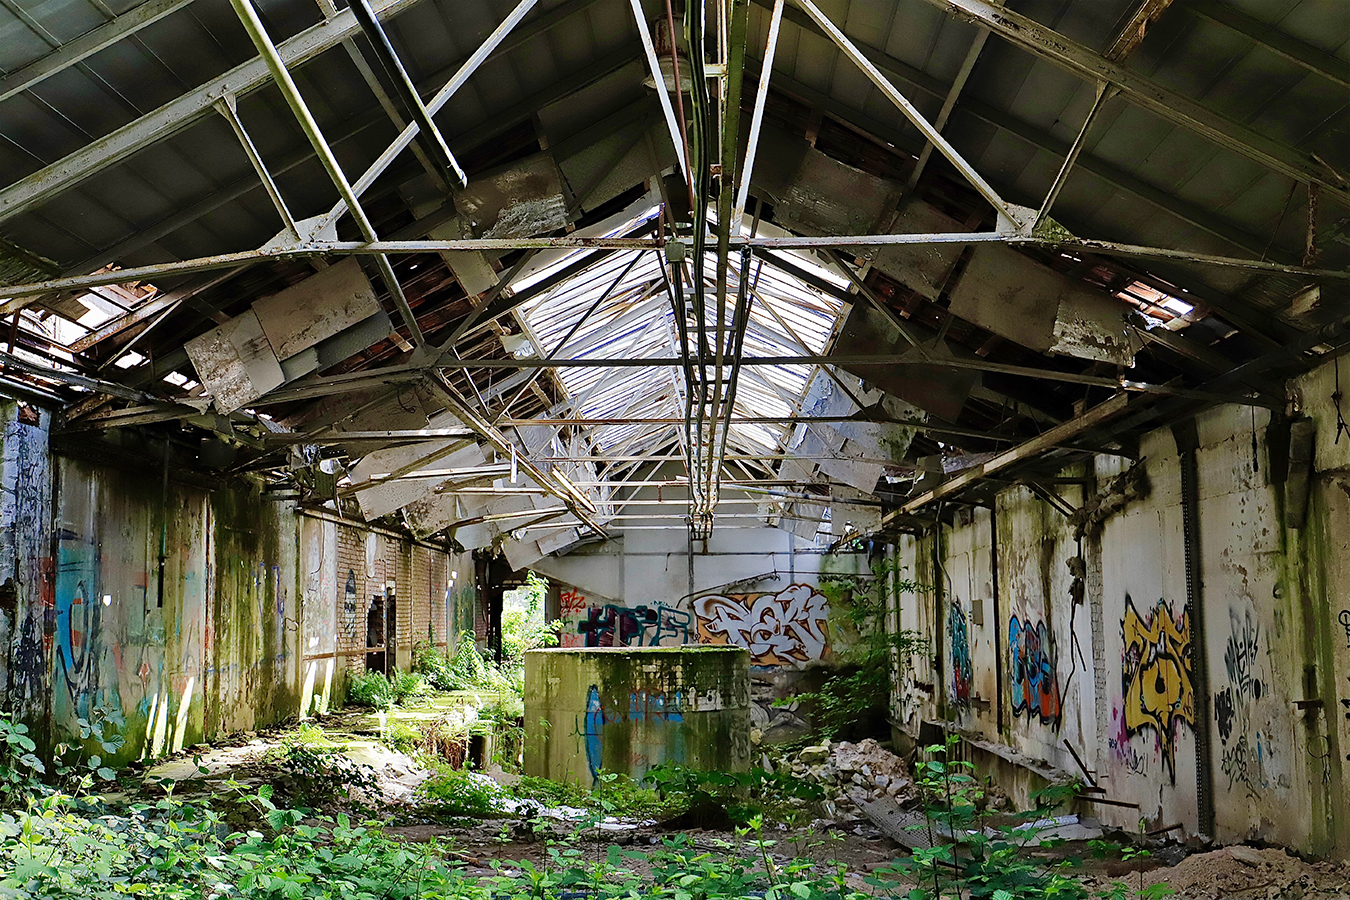 Interior of a building in the abandoned premises of the former Sarreguemines faience factories. ©2021 Mathieu Improvisato